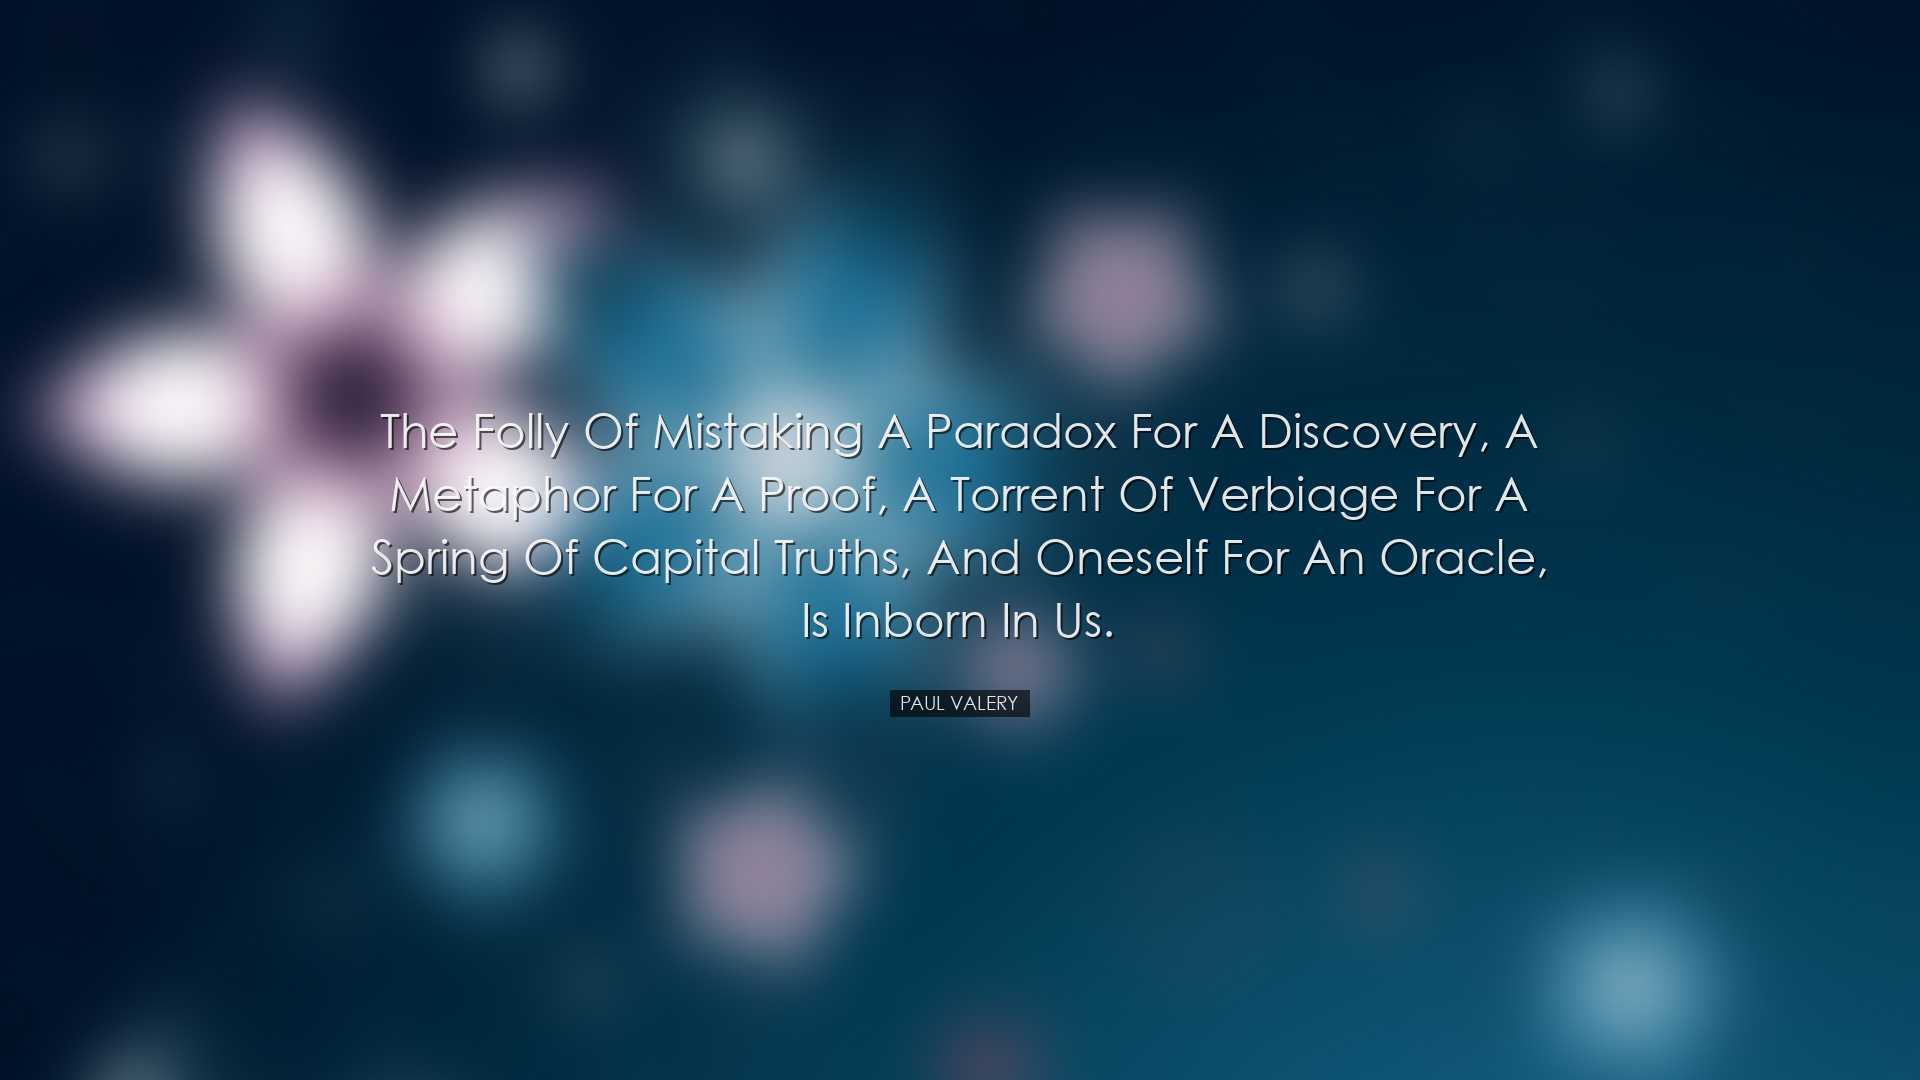 The folly of mistaking a paradox for a discovery, a metaphor for a